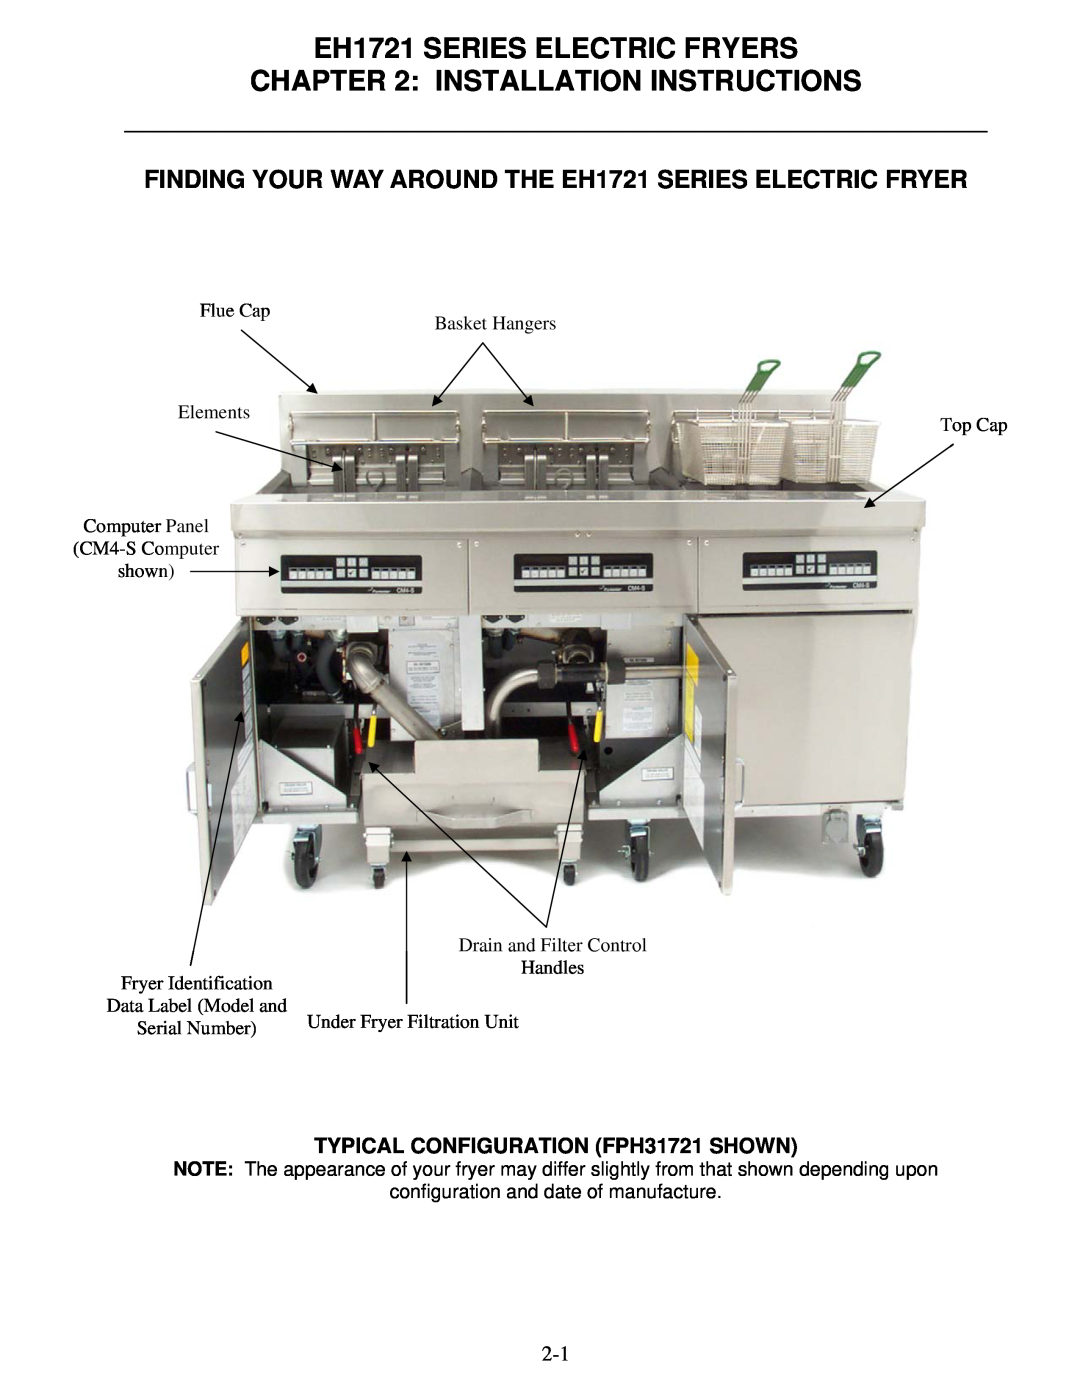 Frymaster Installation Instructions, EH1721 SERIES ELECTRIC FRYERS, TYPICAL CONFIGURATION FPH31721 SHOWN 